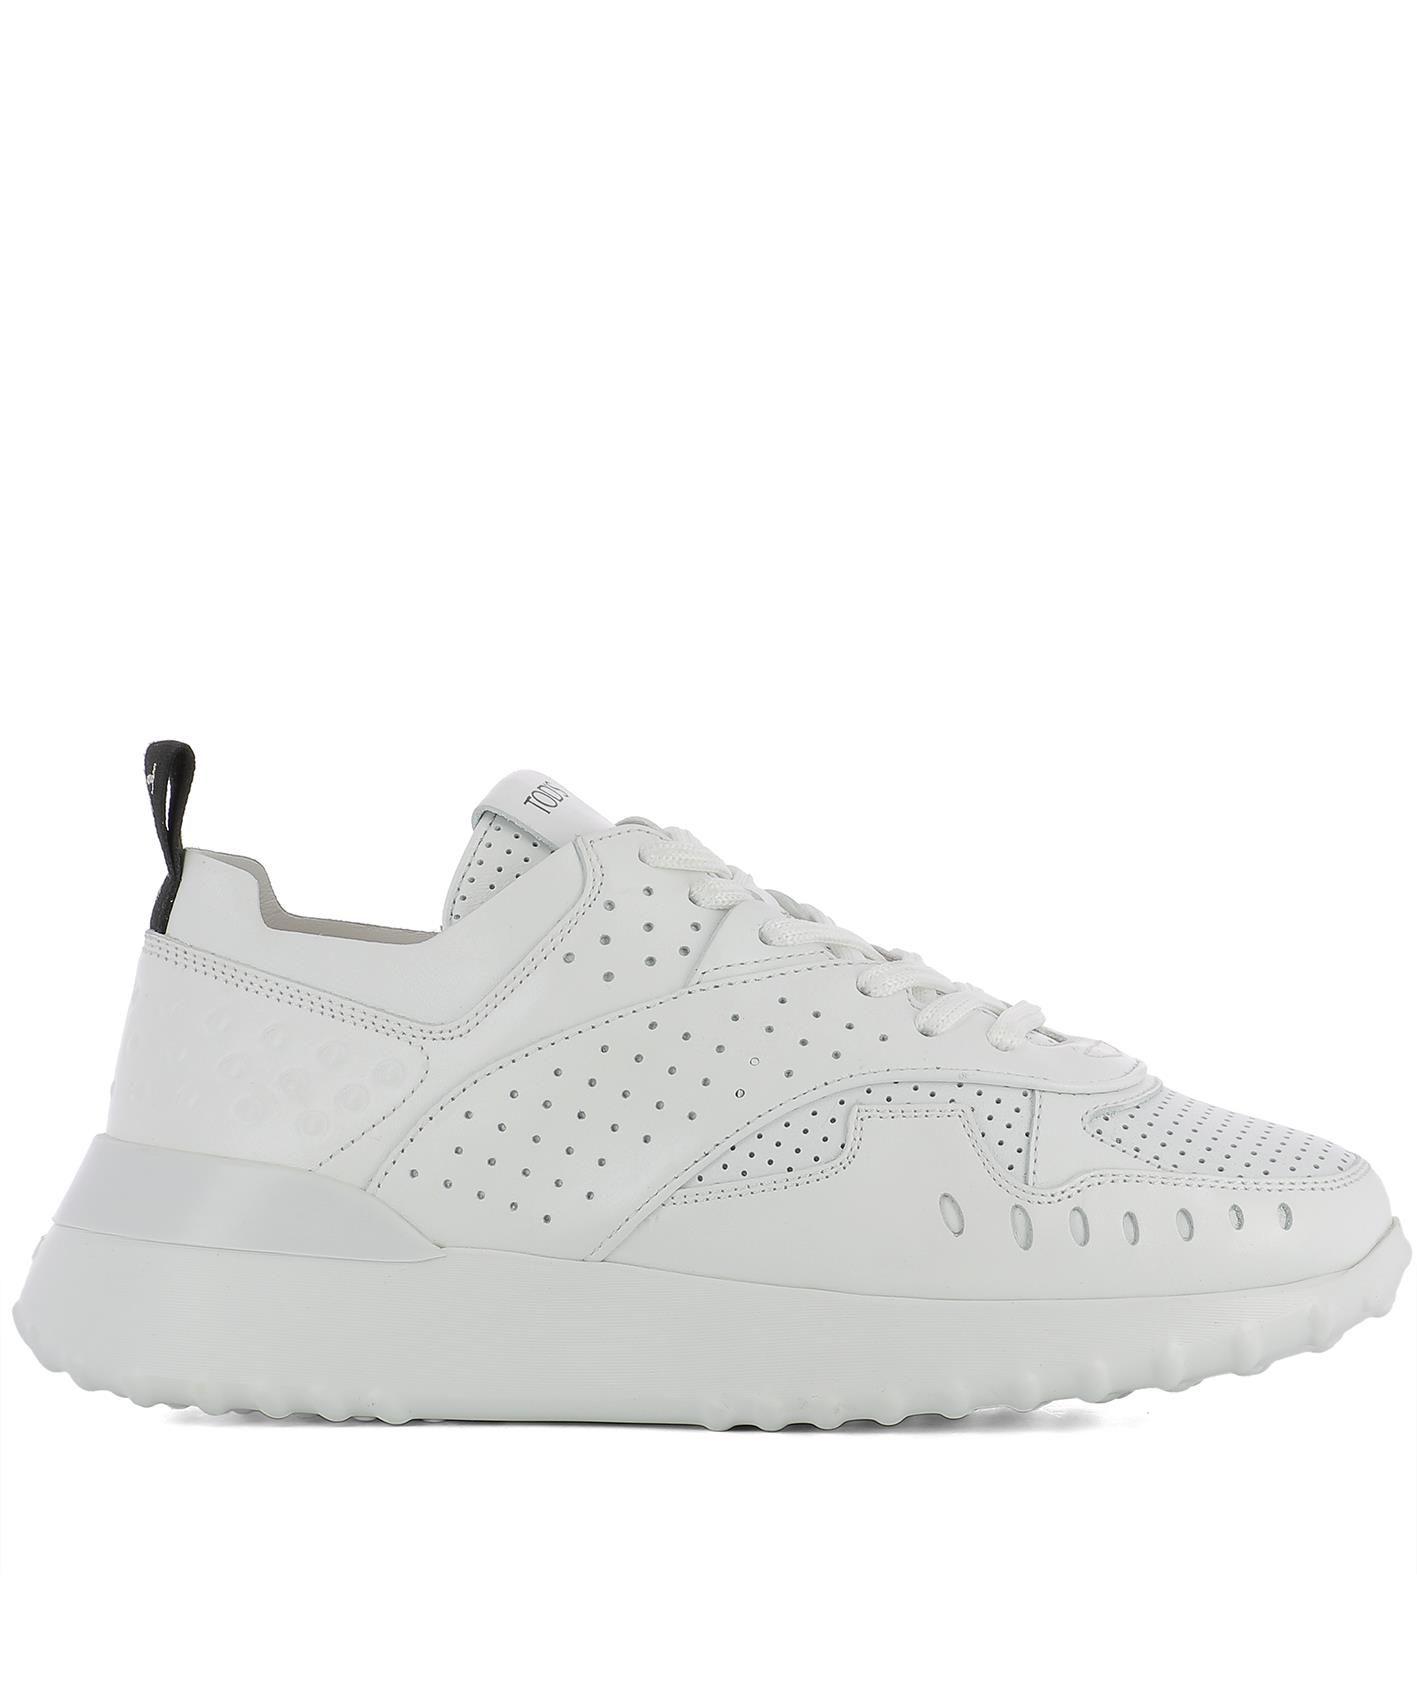 Tod's White Leather Sneakers in White - Lyst